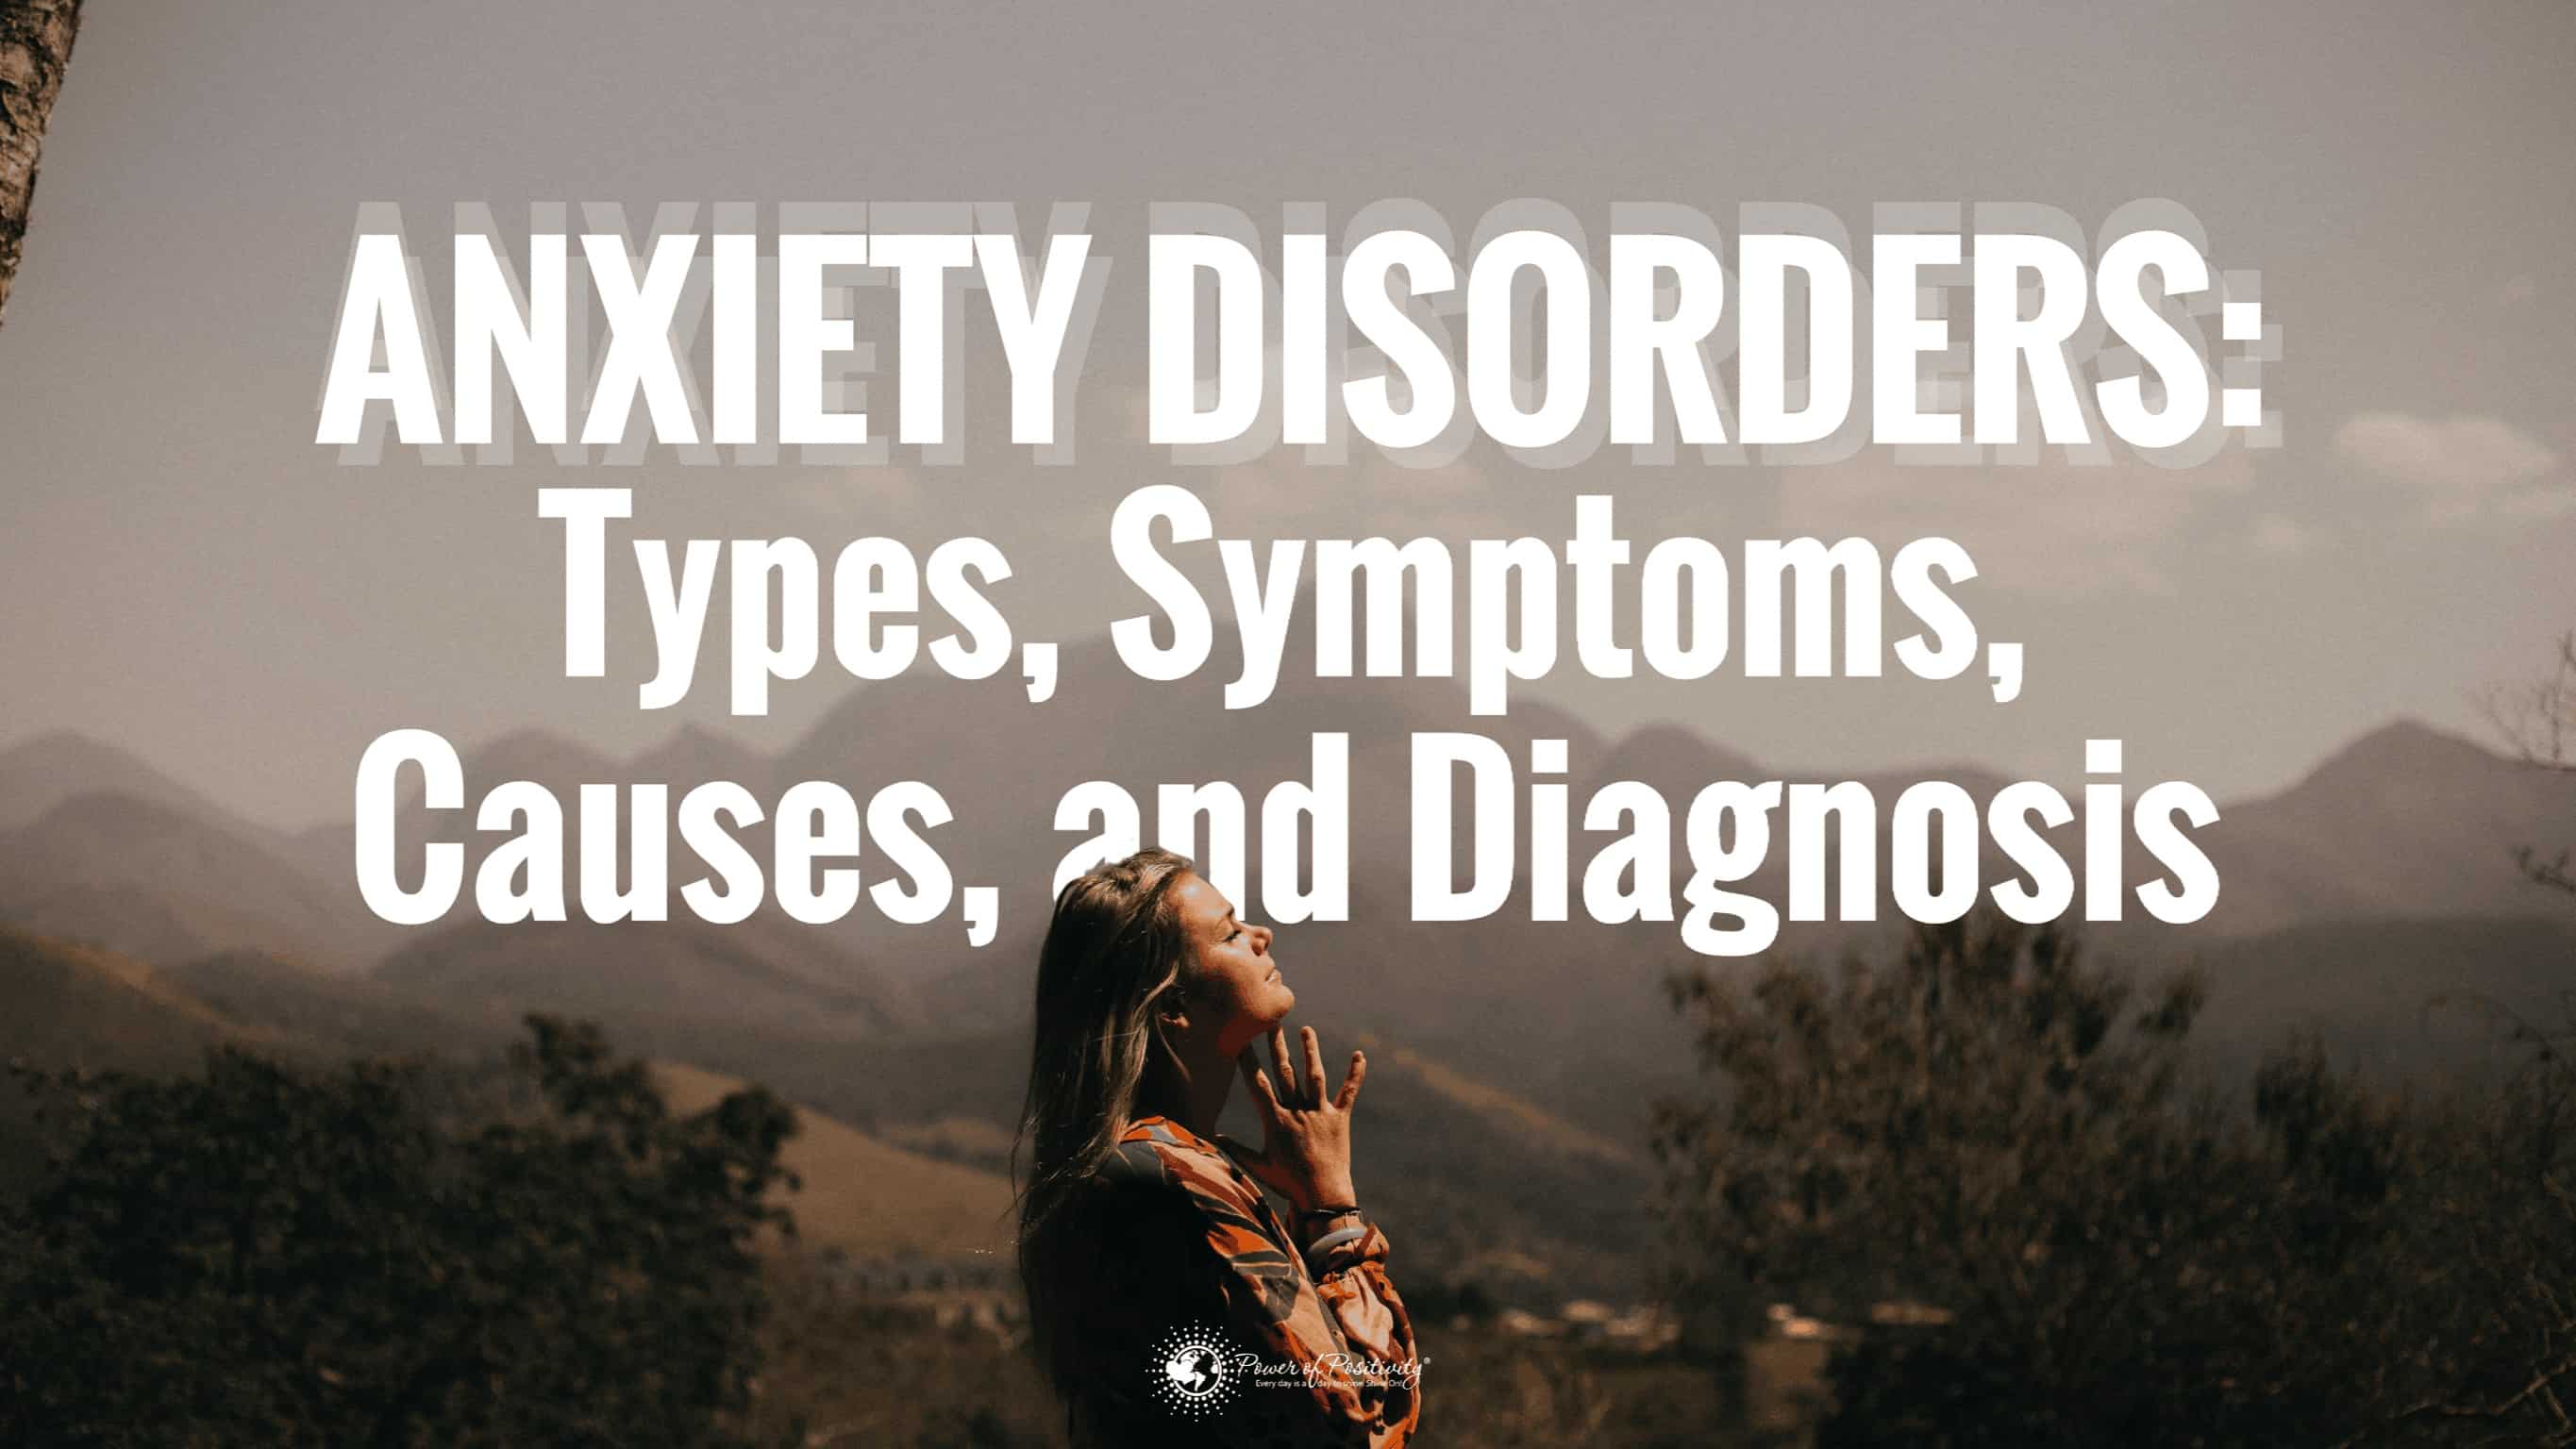 Anxiety Disorders: Types, Symptoms, Causes, and Diagnosis